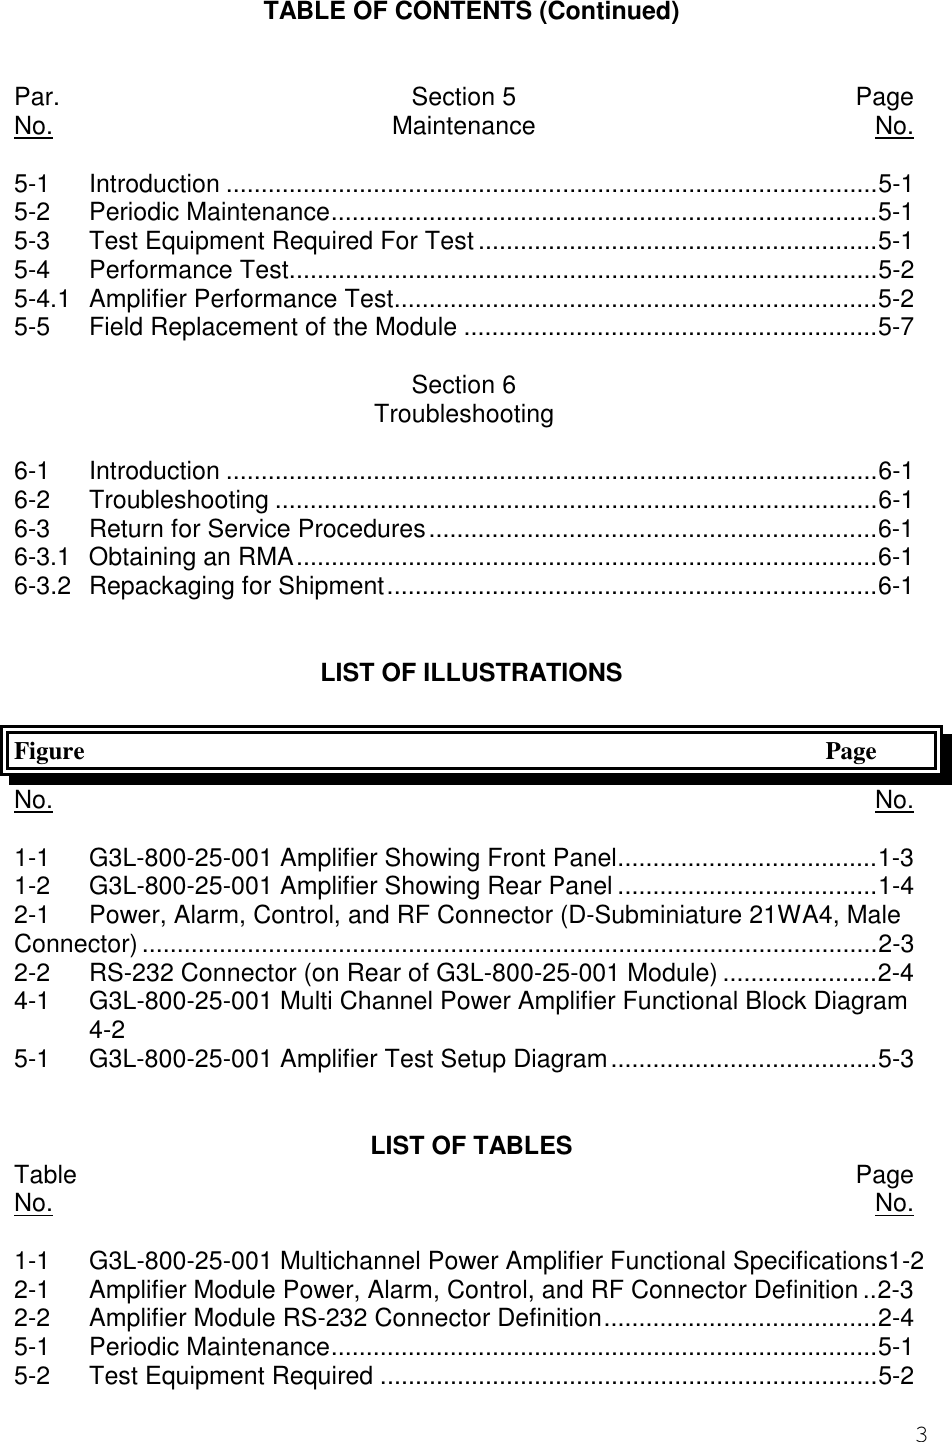 3TABLE OF CONTENTS (Continued)Par. Section 5 PageNo. Maintenance No.5-1 Introduction .............................................................................................5-15-2 Periodic Maintenance..............................................................................5-15-3 Test Equipment Required For Test.........................................................5-15-4 Performance Test....................................................................................5-25-4.1 Amplifier Performance Test.....................................................................5-25-5 Field Replacement of the Module ...........................................................5-7Section 6Troubleshooting6-1 Introduction .............................................................................................6-16-2 Troubleshooting ......................................................................................6-16-3 Return for Service Procedures................................................................6-16-3.1 Obtaining an RMA...................................................................................6-16-3.2 Repackaging for Shipment......................................................................6-1LIST OF ILLUSTRATIONSFigure PageNo. No.1-1 G3L-800-25-001 Amplifier Showing Front Panel.....................................1-31-2 G3L-800-25-001 Amplifier Showing Rear Panel .....................................1-42-1 Power, Alarm, Control, and RF Connector (D-Subminiature 21WA4, MaleConnector) .........................................................................................................2-32-2 RS-232 Connector (on Rear of G3L-800-25-001 Module) ......................2-44-1 G3L-800-25-001 Multi Channel Power Amplifier Functional Block Diagram4-25-1 G3L-800-25-001 Amplifier Test Setup Diagram......................................5-3LIST OF TABLESTable PageNo. No.1-1 G3L-800-25-001 Multichannel Power Amplifier Functional Specifications1-22-1 Amplifier Module Power, Alarm, Control, and RF Connector Definition ..2-32-2 Amplifier Module RS-232 Connector Definition.......................................2-45-1 Periodic Maintenance..............................................................................5-15-2 Test Equipment Required .......................................................................5-2